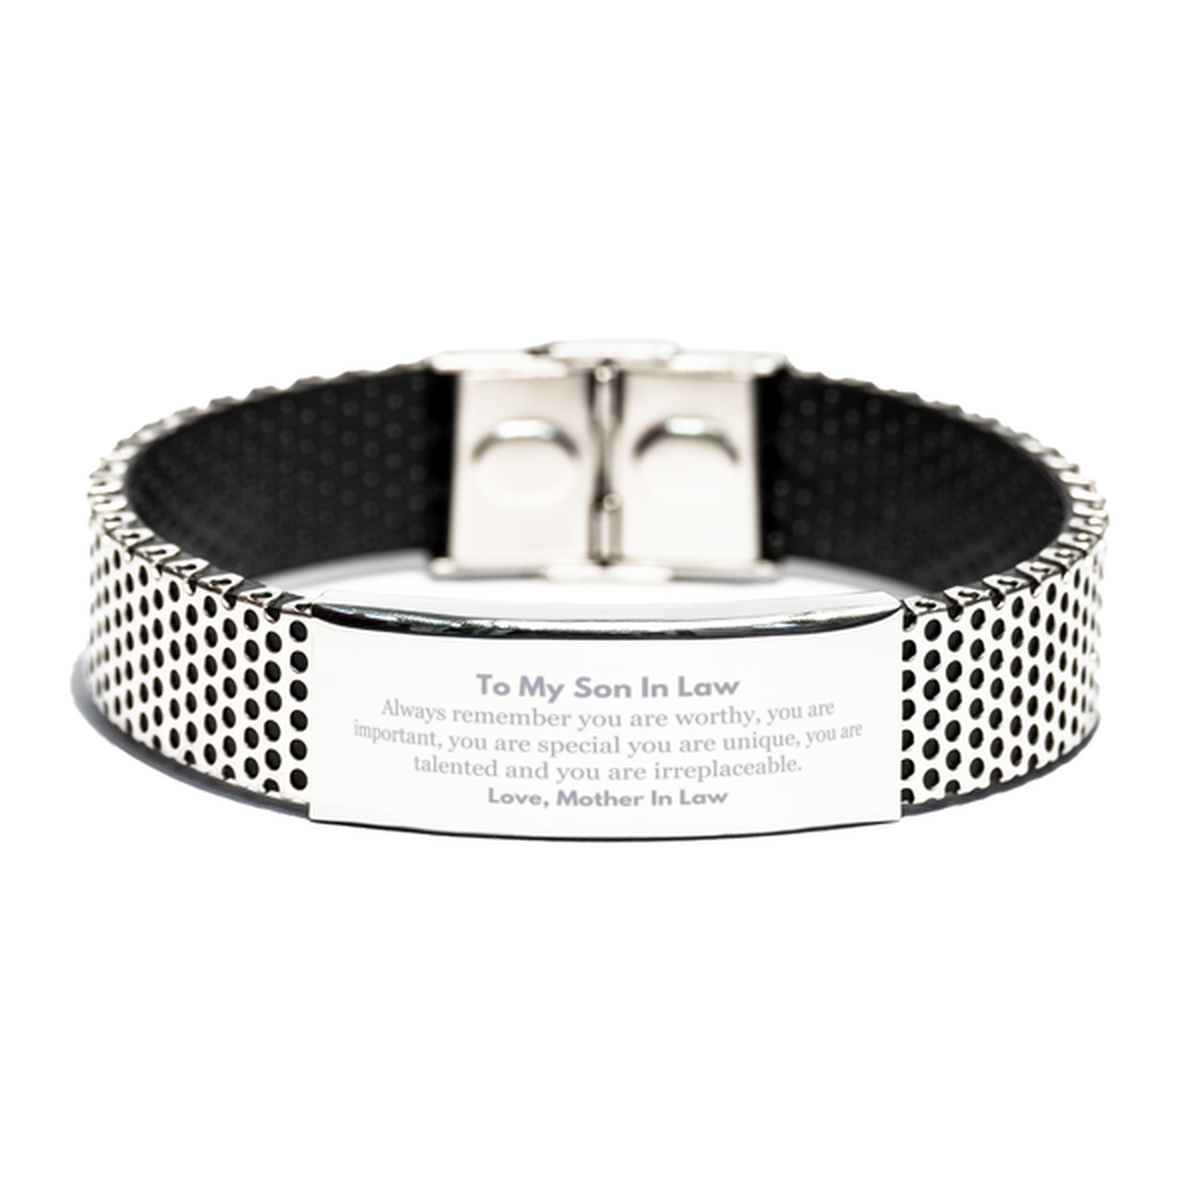 Son In Law Birthday Gifts from Mother In Law, Inspirational Stainless Steel Bracelet for Son In Law Christmas Graduation Gifts for Son In Law Always remember you are worthy, you are important. Love, Mother In Law